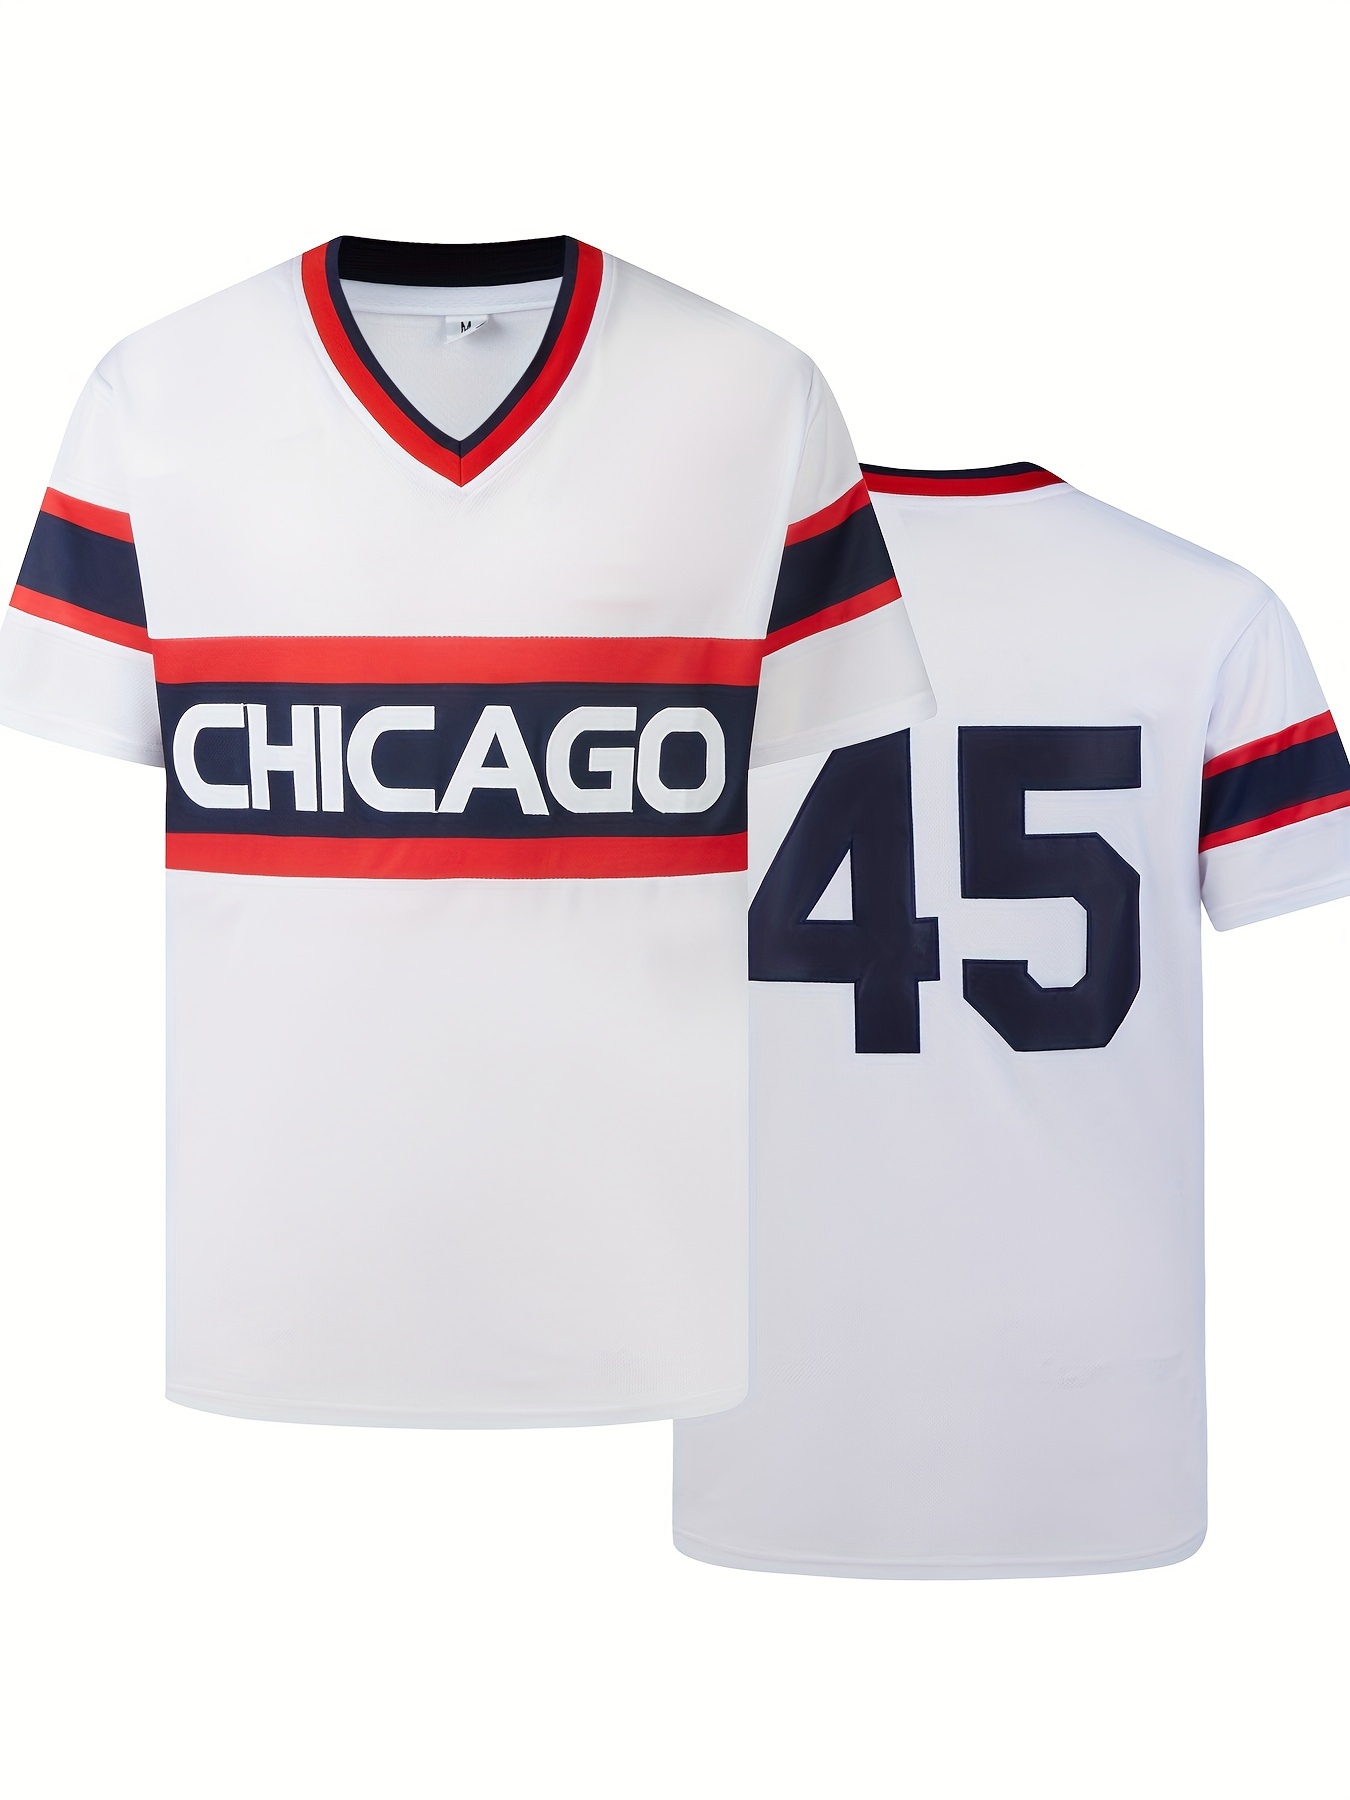 Men's Chicago #45 Embroidery Baseball Jersey, Classic Retro Design Short Sleeve Breathable Shirt for Training Competition,Temu